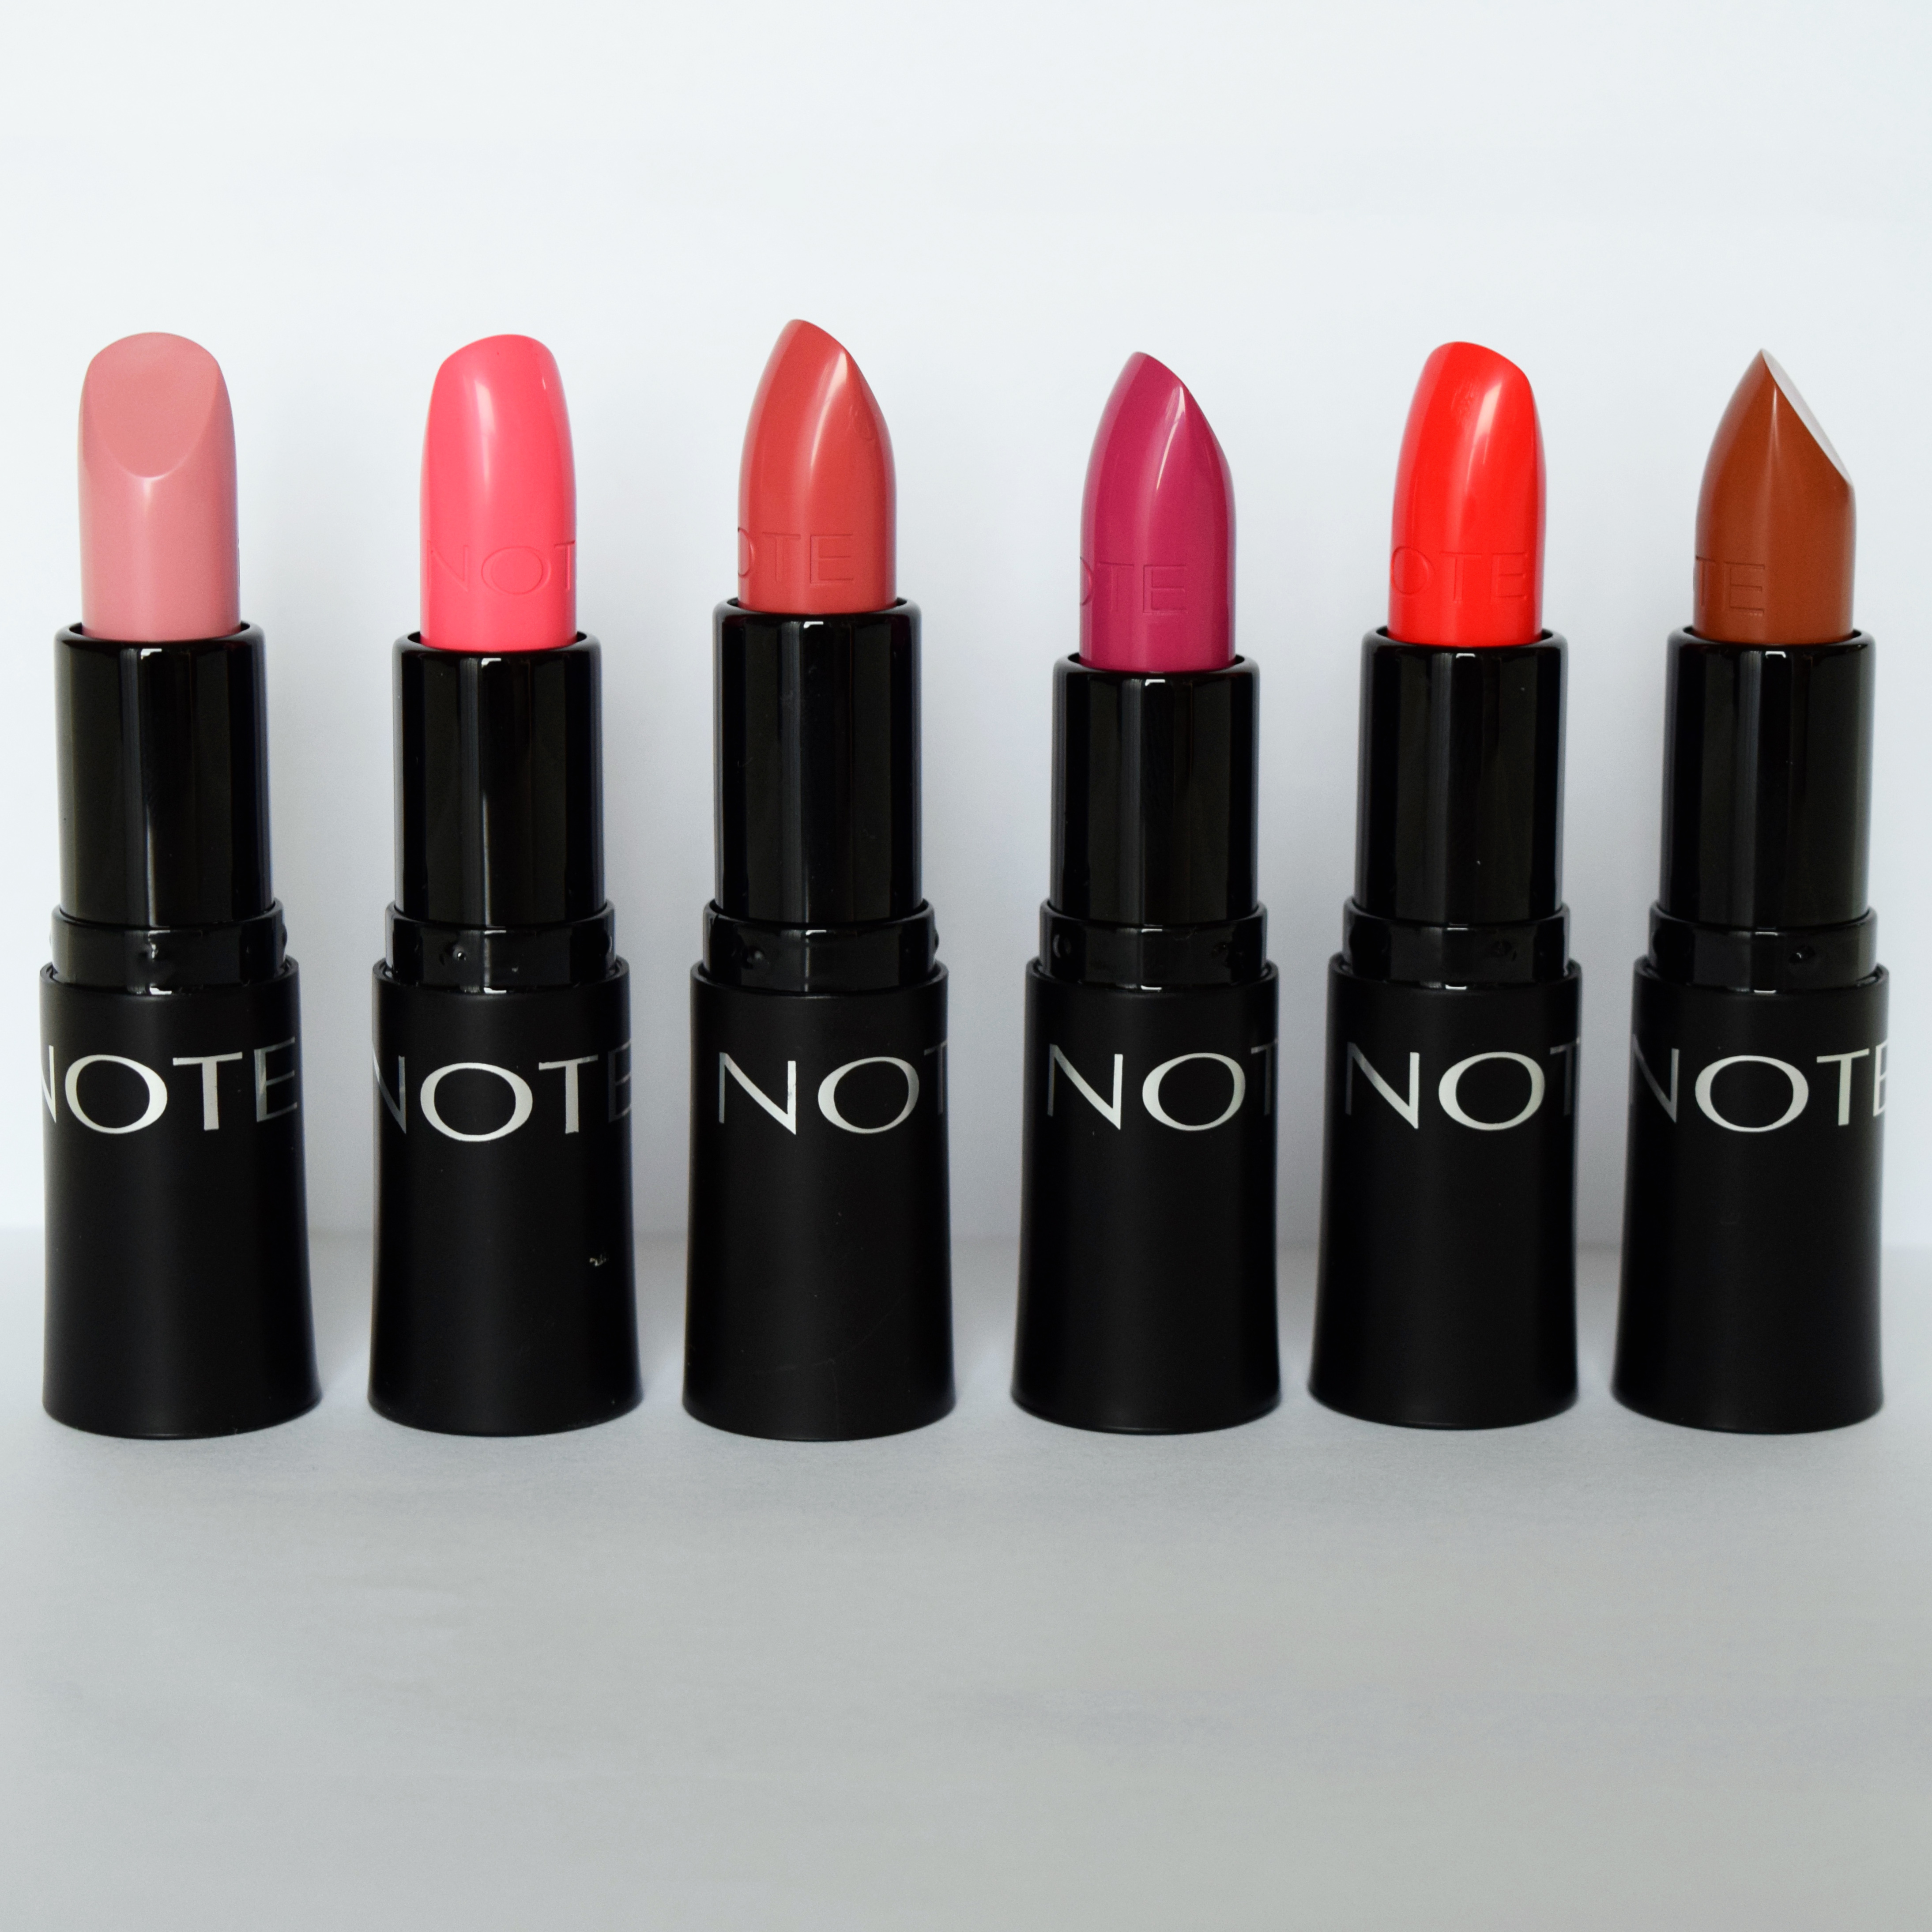 Review: Note Cosmetics Ultra Rich Color Lipstick